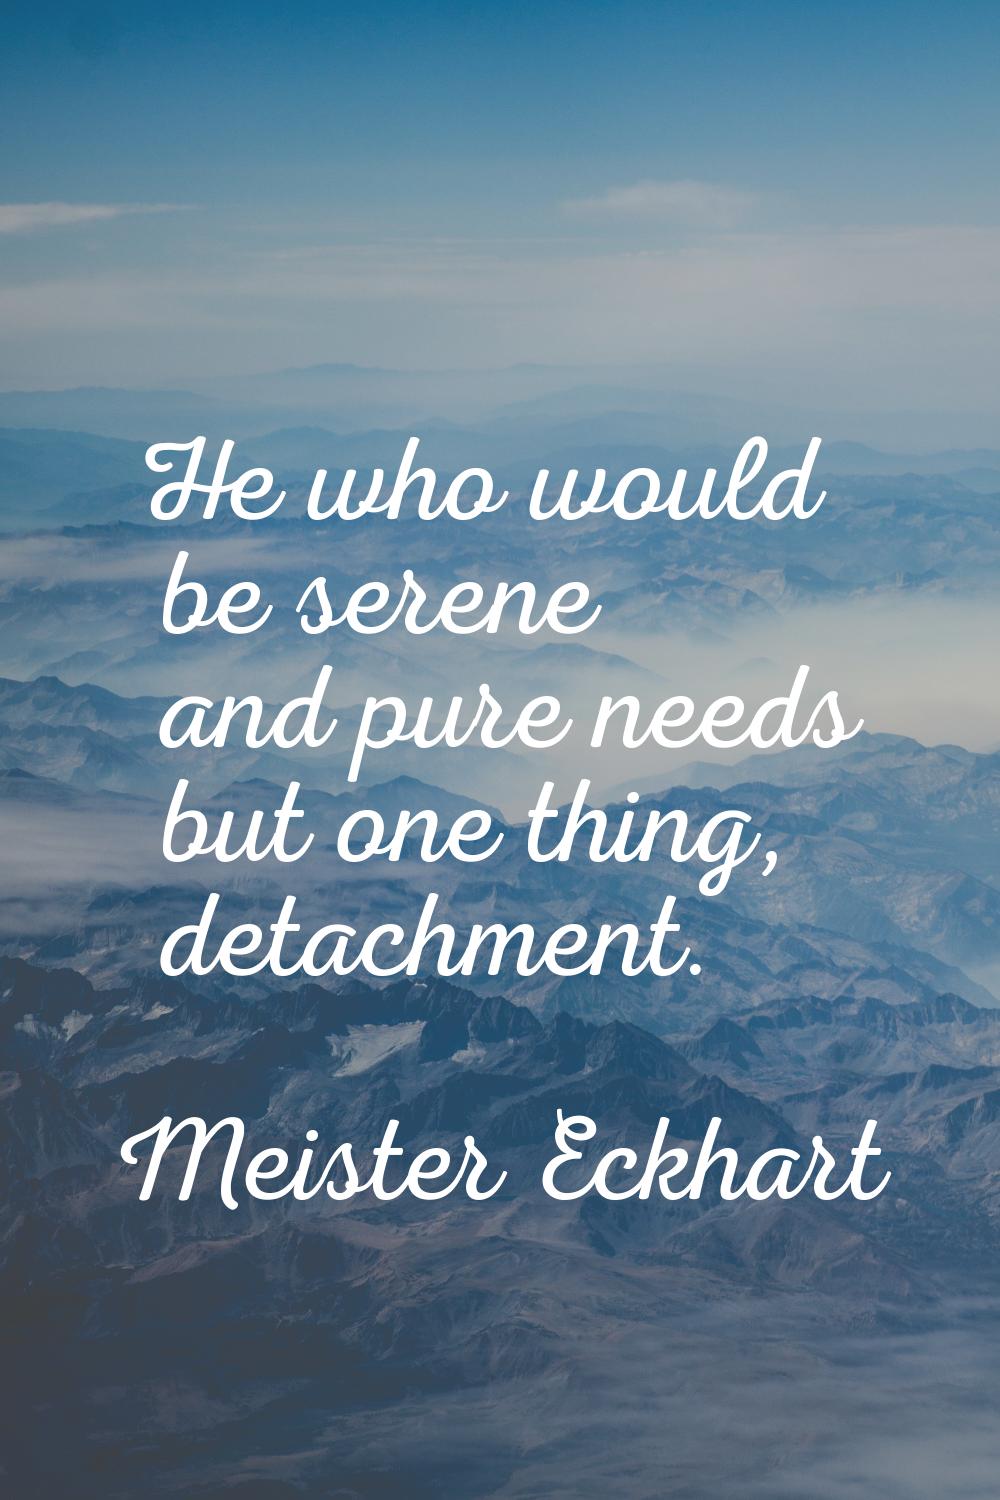 He who would be serene and pure needs but one thing, detachment.